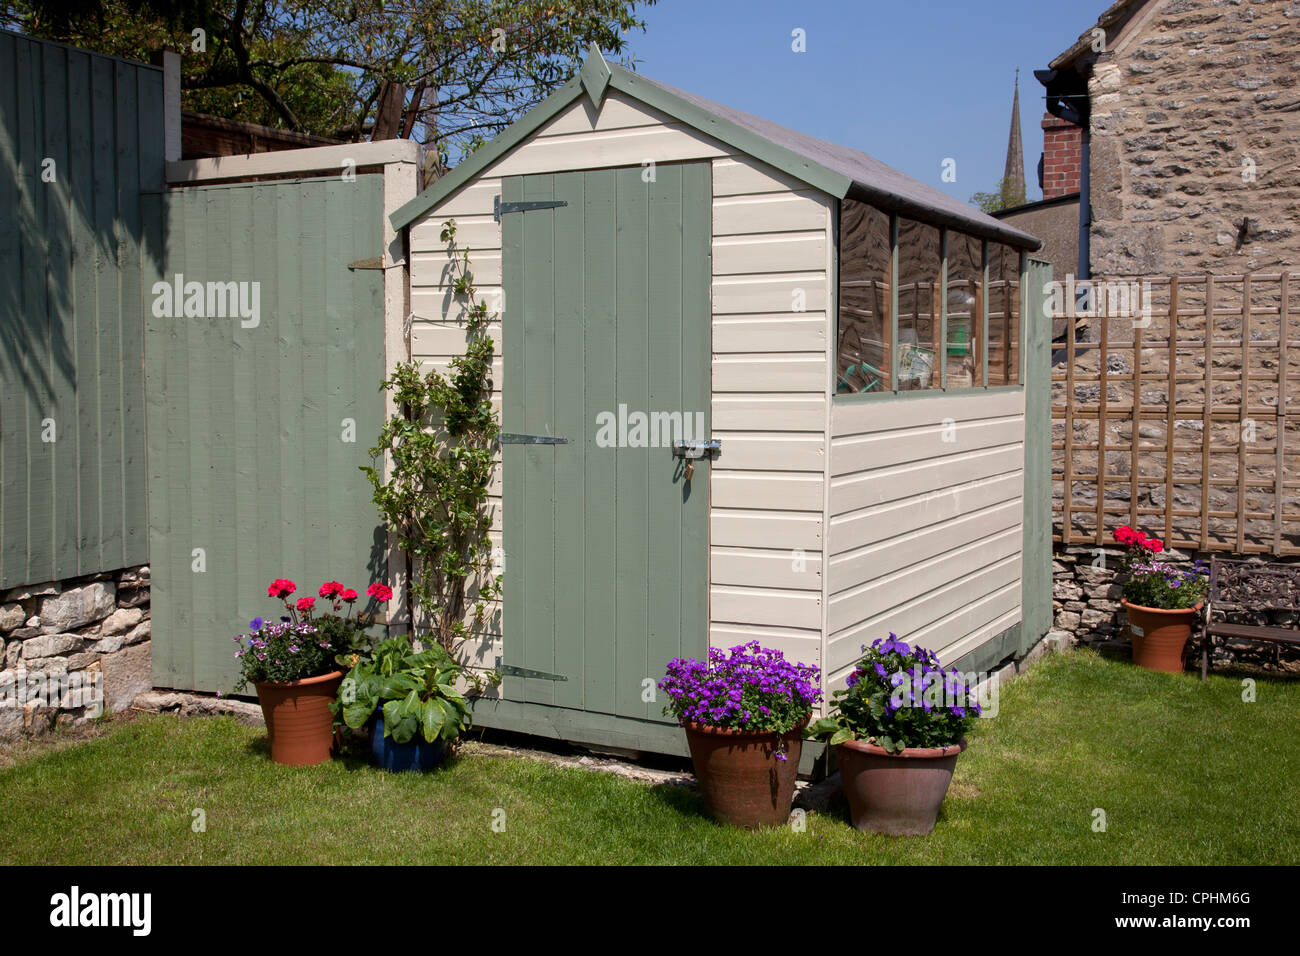 painted garden shed in small English town house garden with pots of flowers Stock Photo